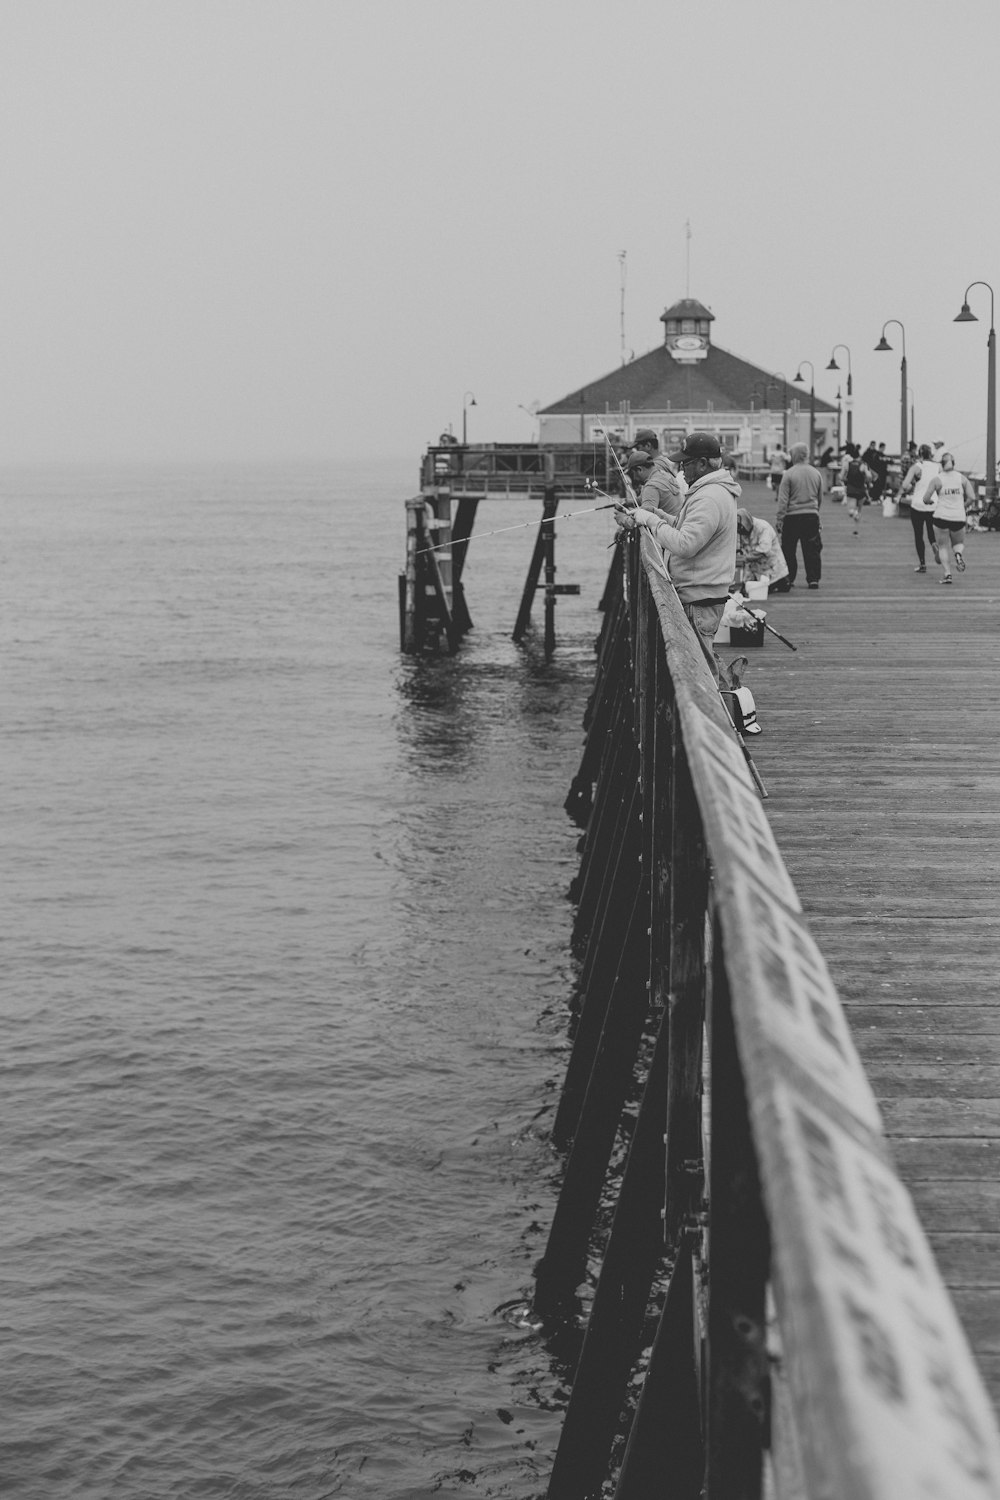 Black and white photograph of people fishing on a pier at Imperial Beach